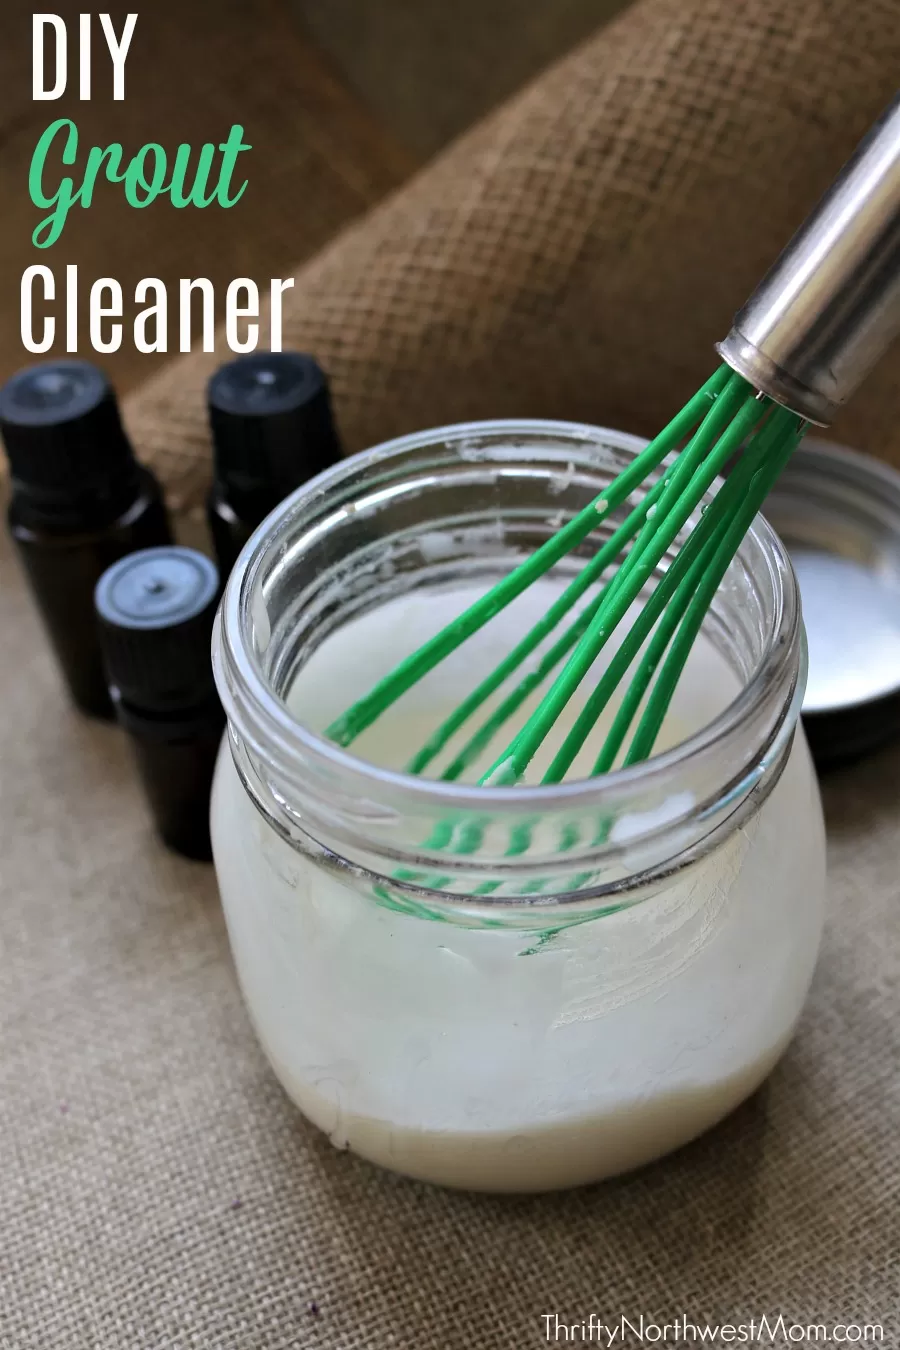 https://www.thriftynorthwestmom.com/wp-content/uploads/2017/08/Try-this-DIY-Homemade-Grout-Cleaner-for-a-frugal-natural-option-for-cleaning-your-bathroom-tiles.webp